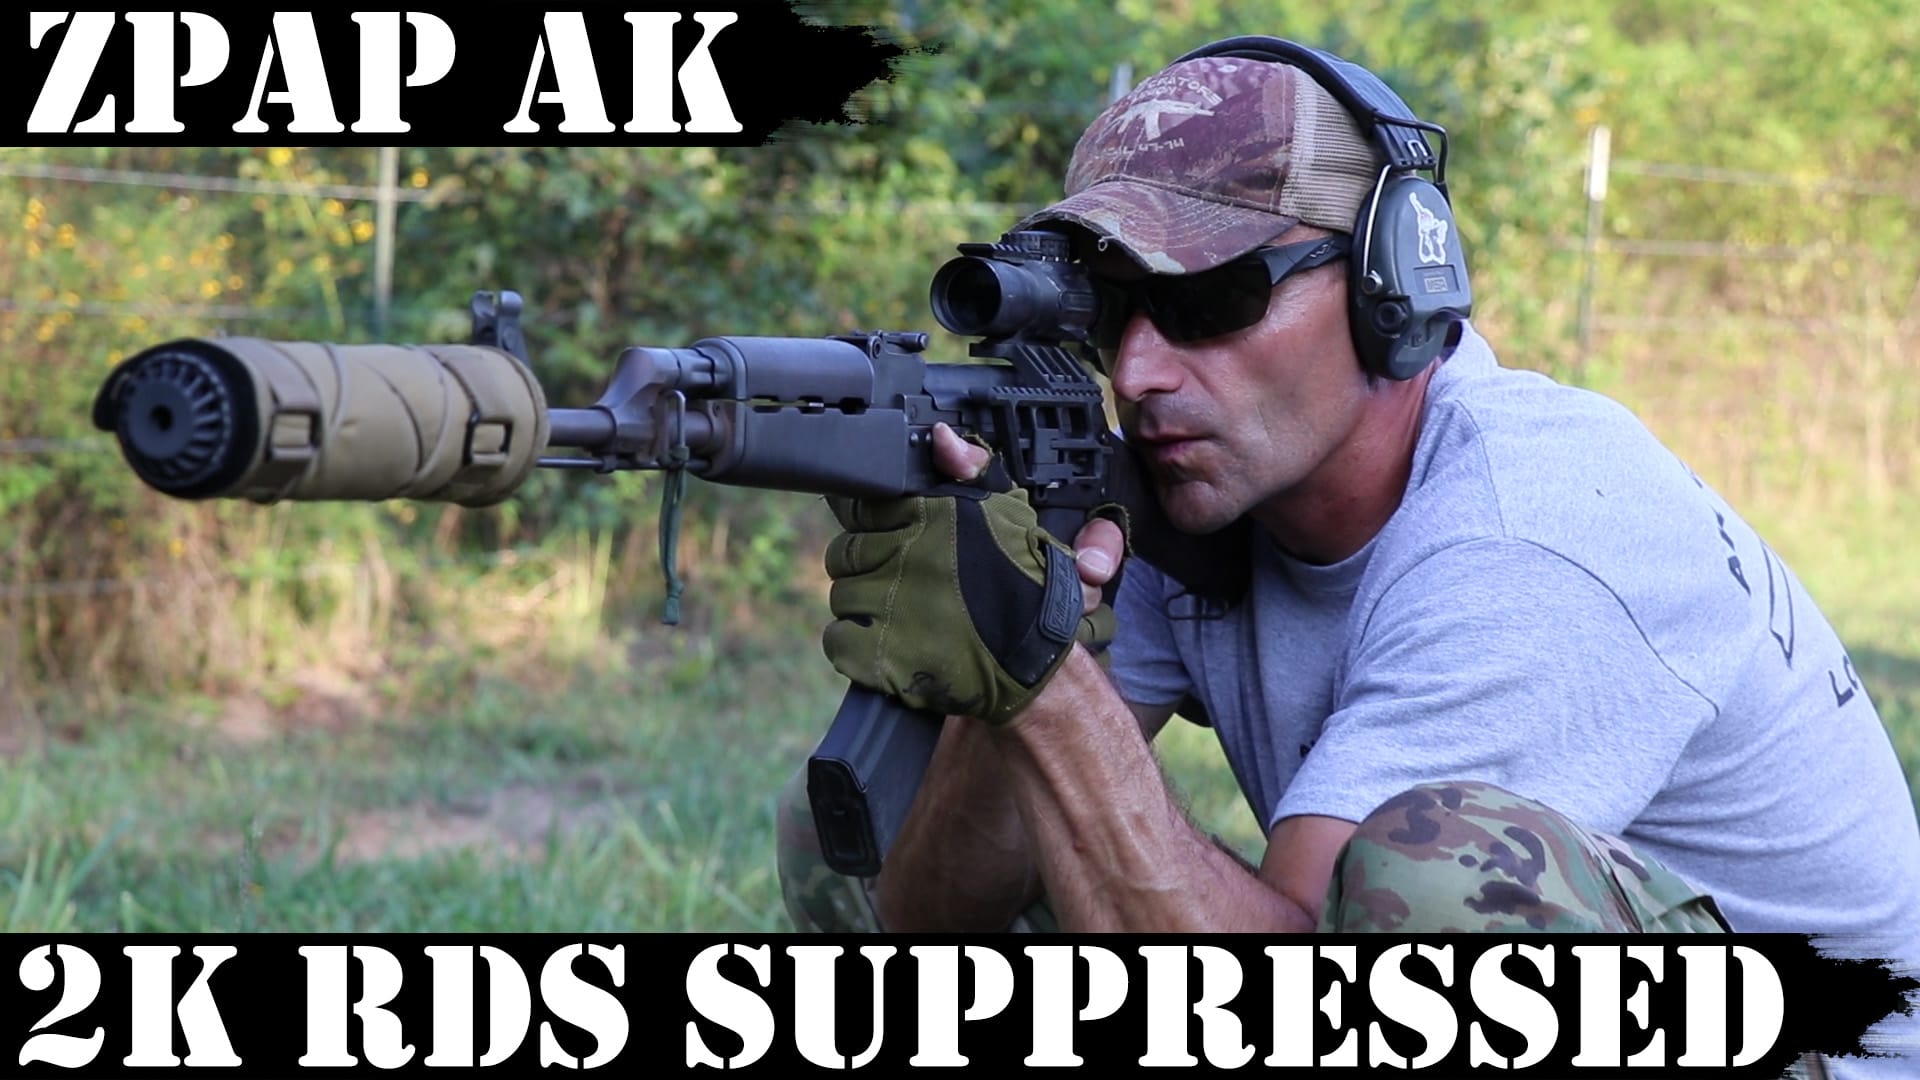 ZPAP AK: 2,000rds Suppressed! Deep Dive!